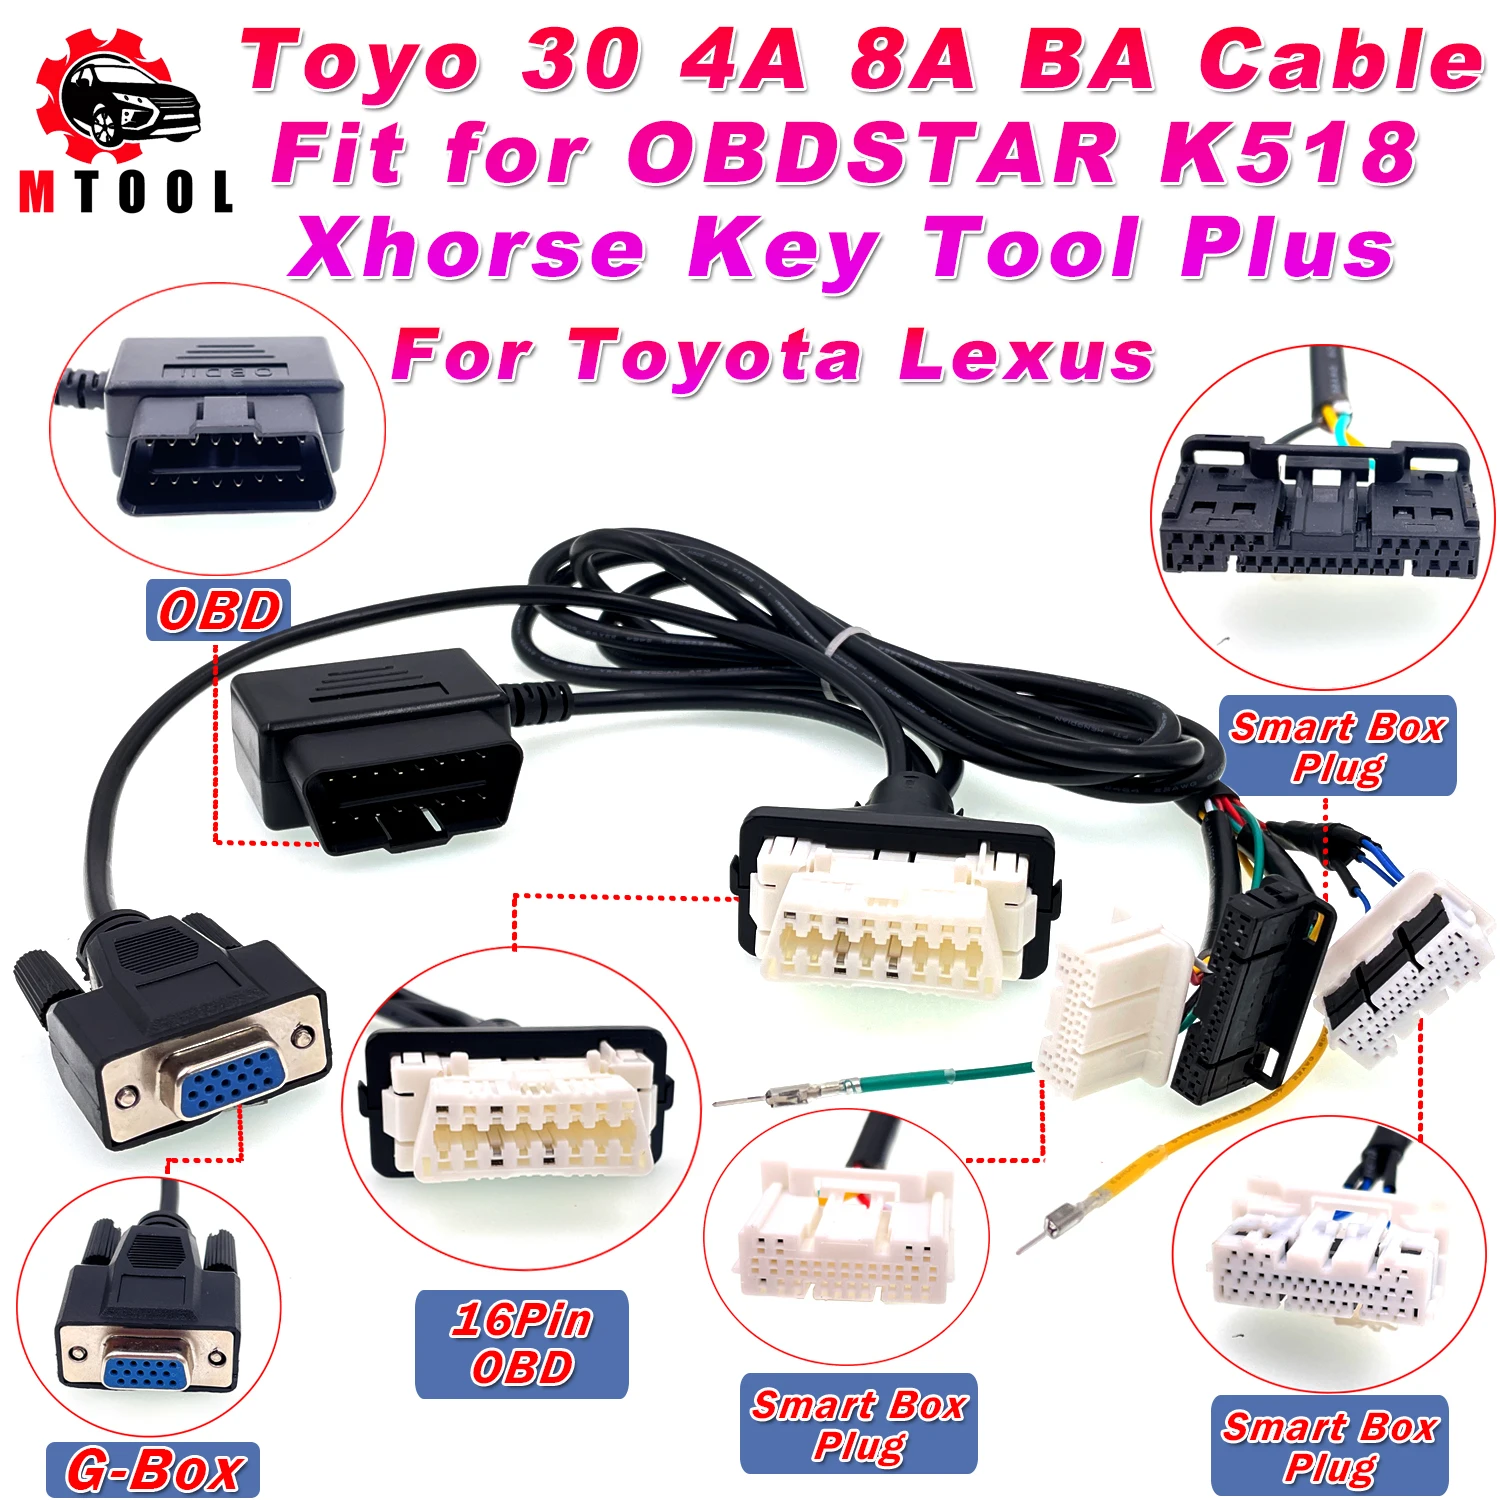 

Toyo 30 Cable 4A 8A BA 3in1 Connector Smart Key Cable 16pin OBD Cable for OBDSTAR K518 Xhorse Key Tool Plus for All Toyota Lexus